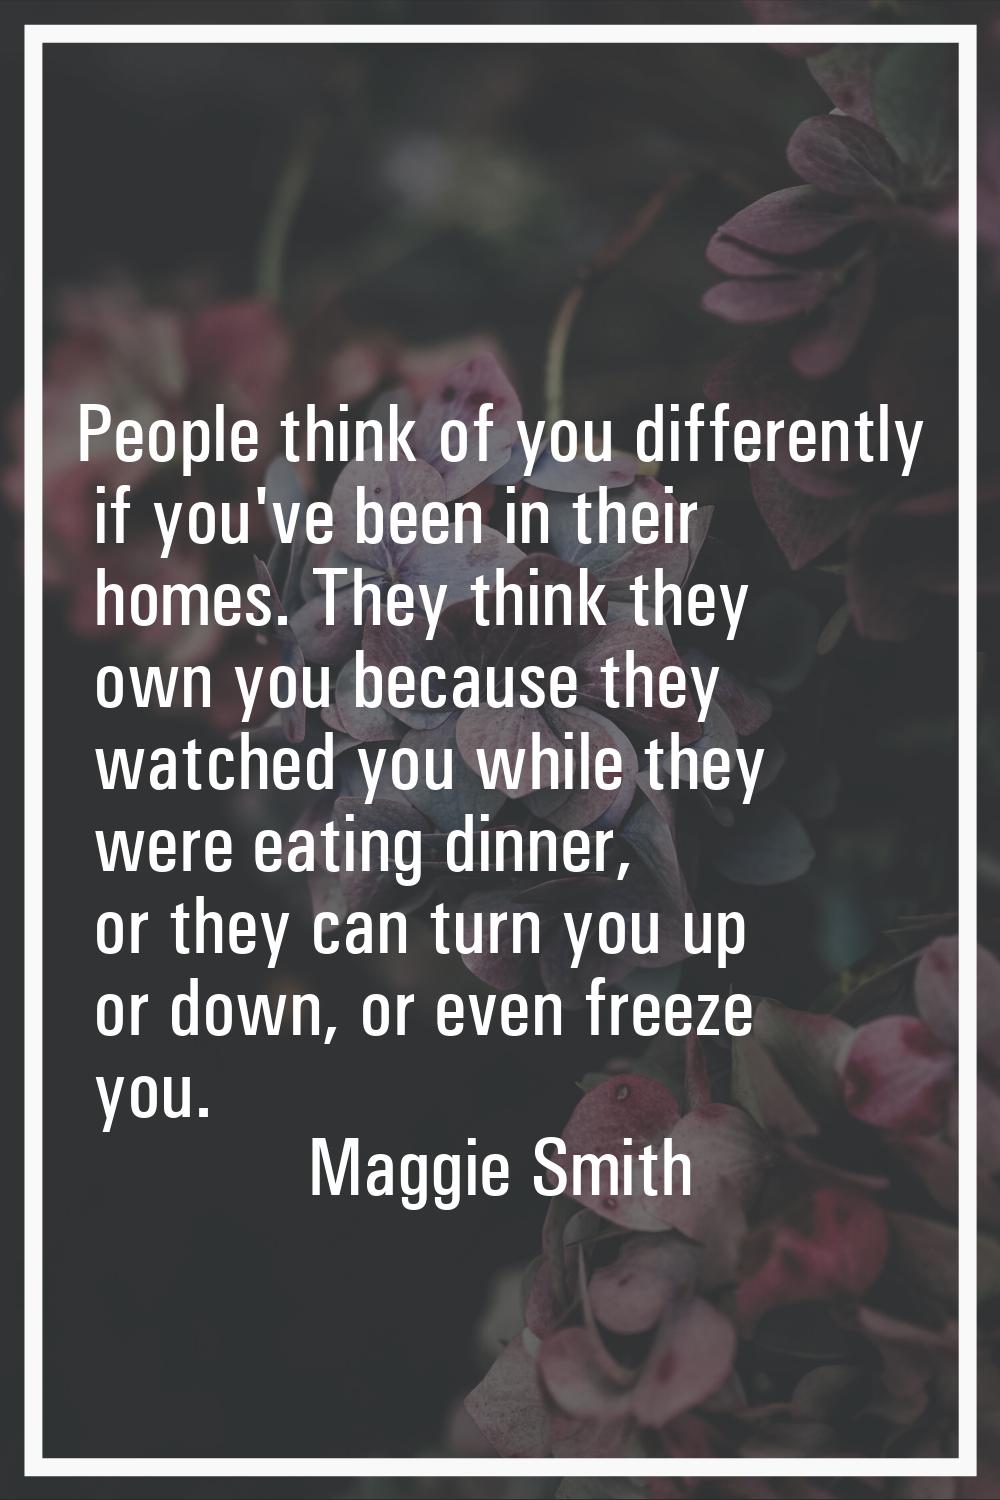 People think of you differently if you've been in their homes. They think they own you because they